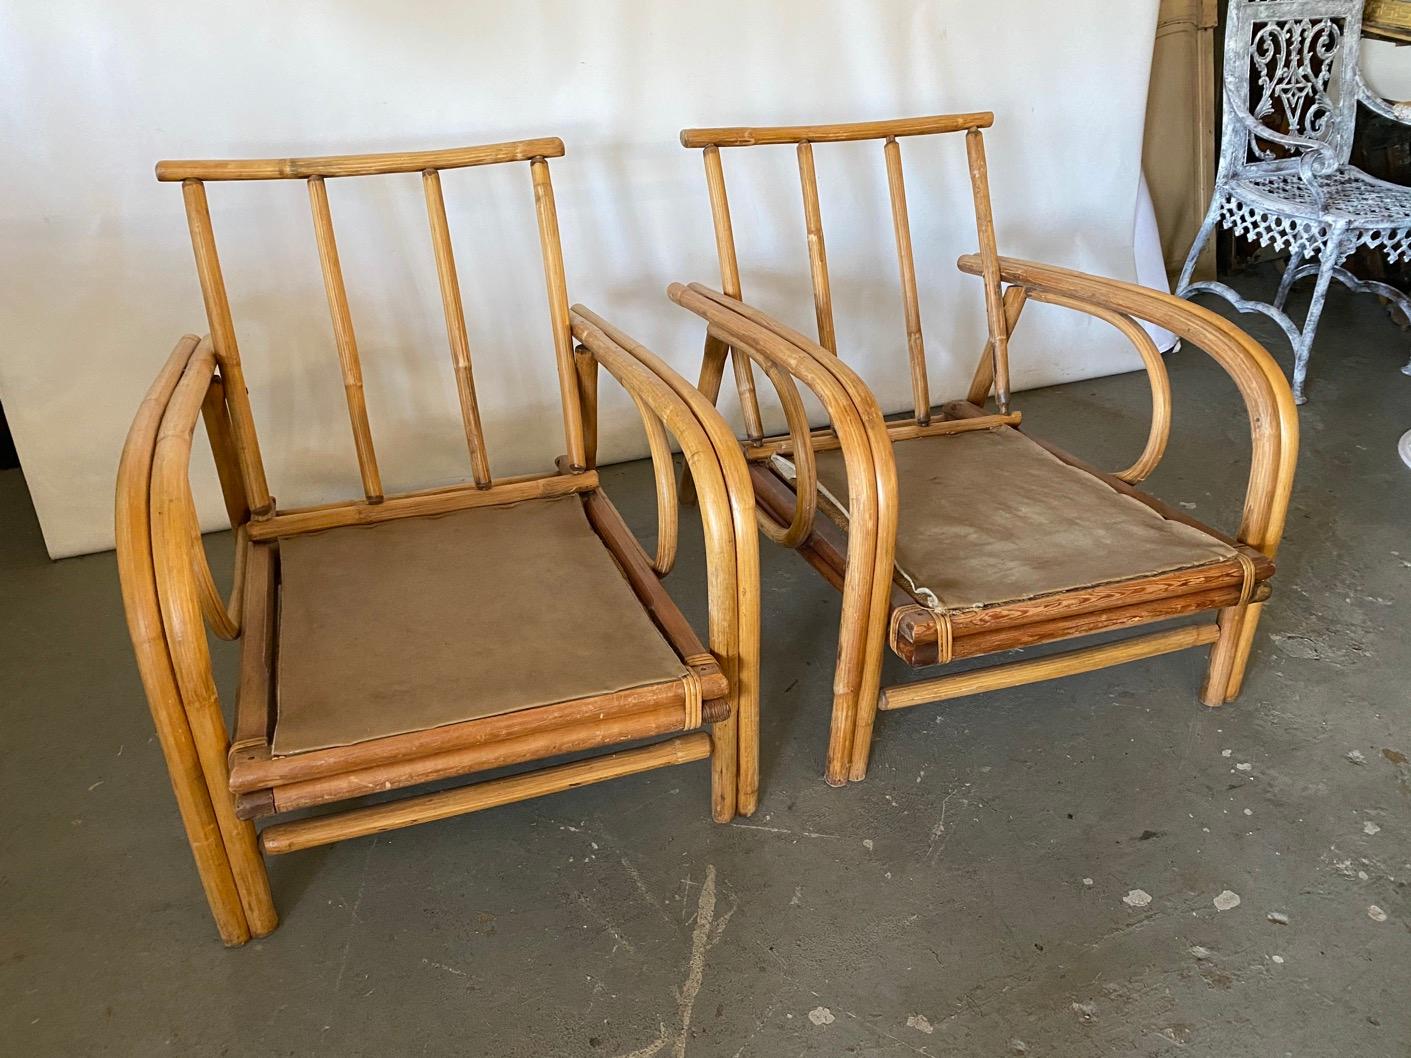 Pair of generously proportion and low to the ground American organic modern rattan wrapped bamboo armchairs. Comfortable. Smooth linear and curved lines. These bentwood style bamboo chairs are suitable for year round use in dry outdoor climates.